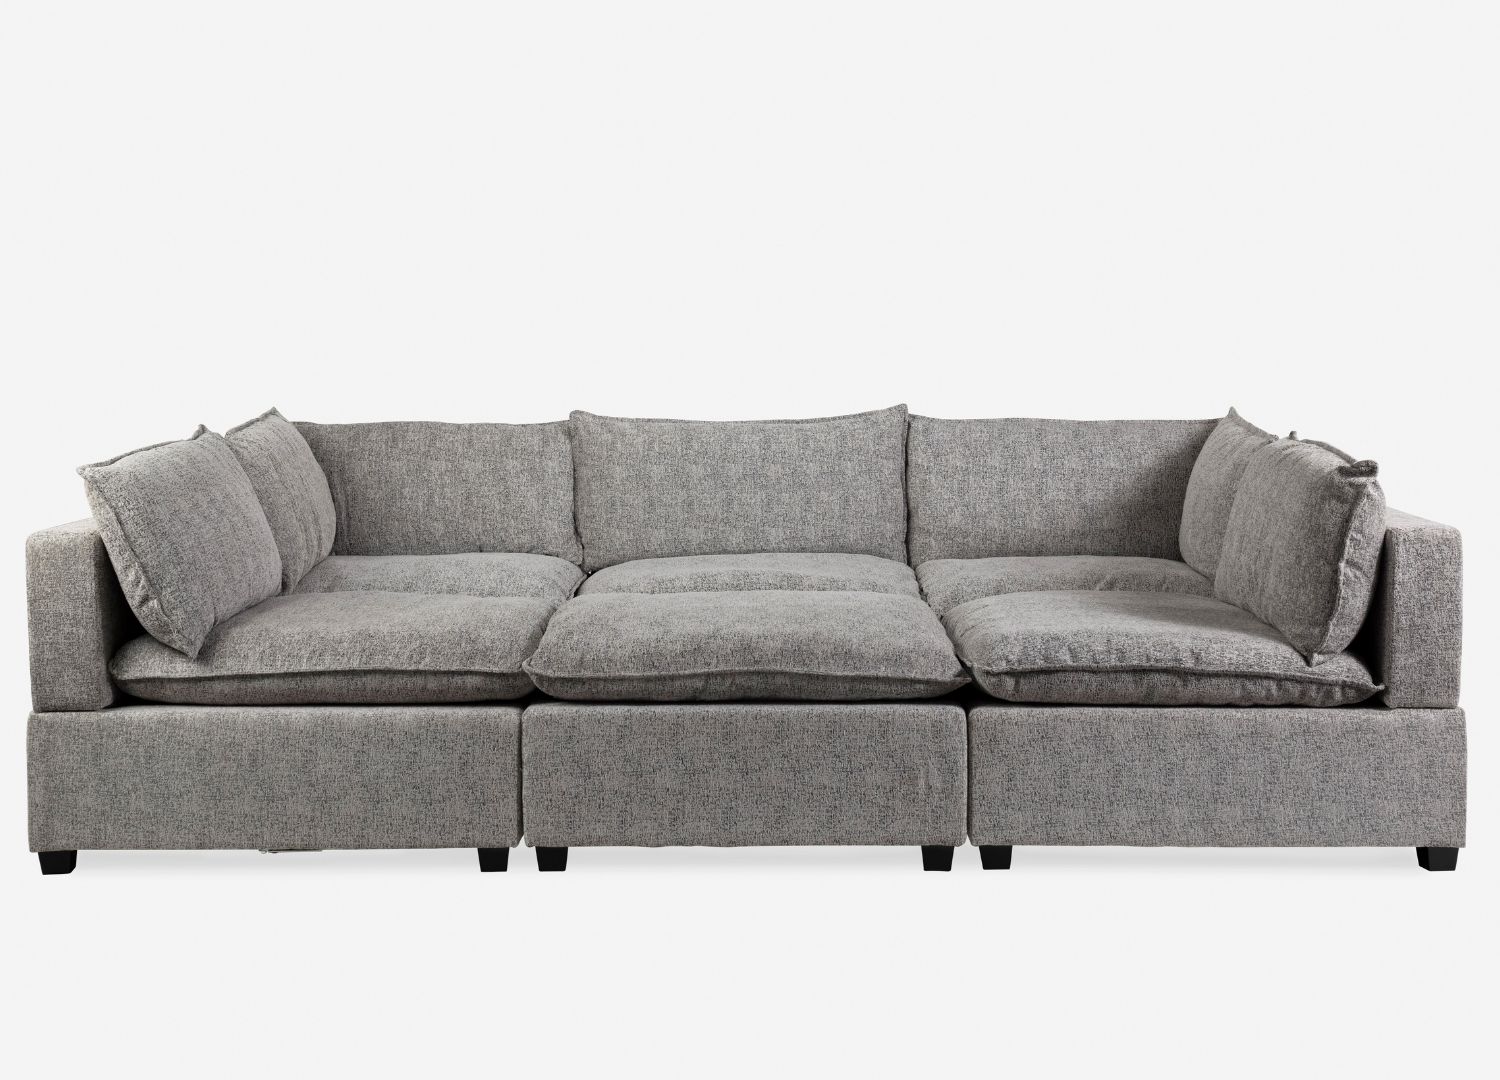 Kova Sofa Collection is perfect for cozy afternoon naps : DesignWanted